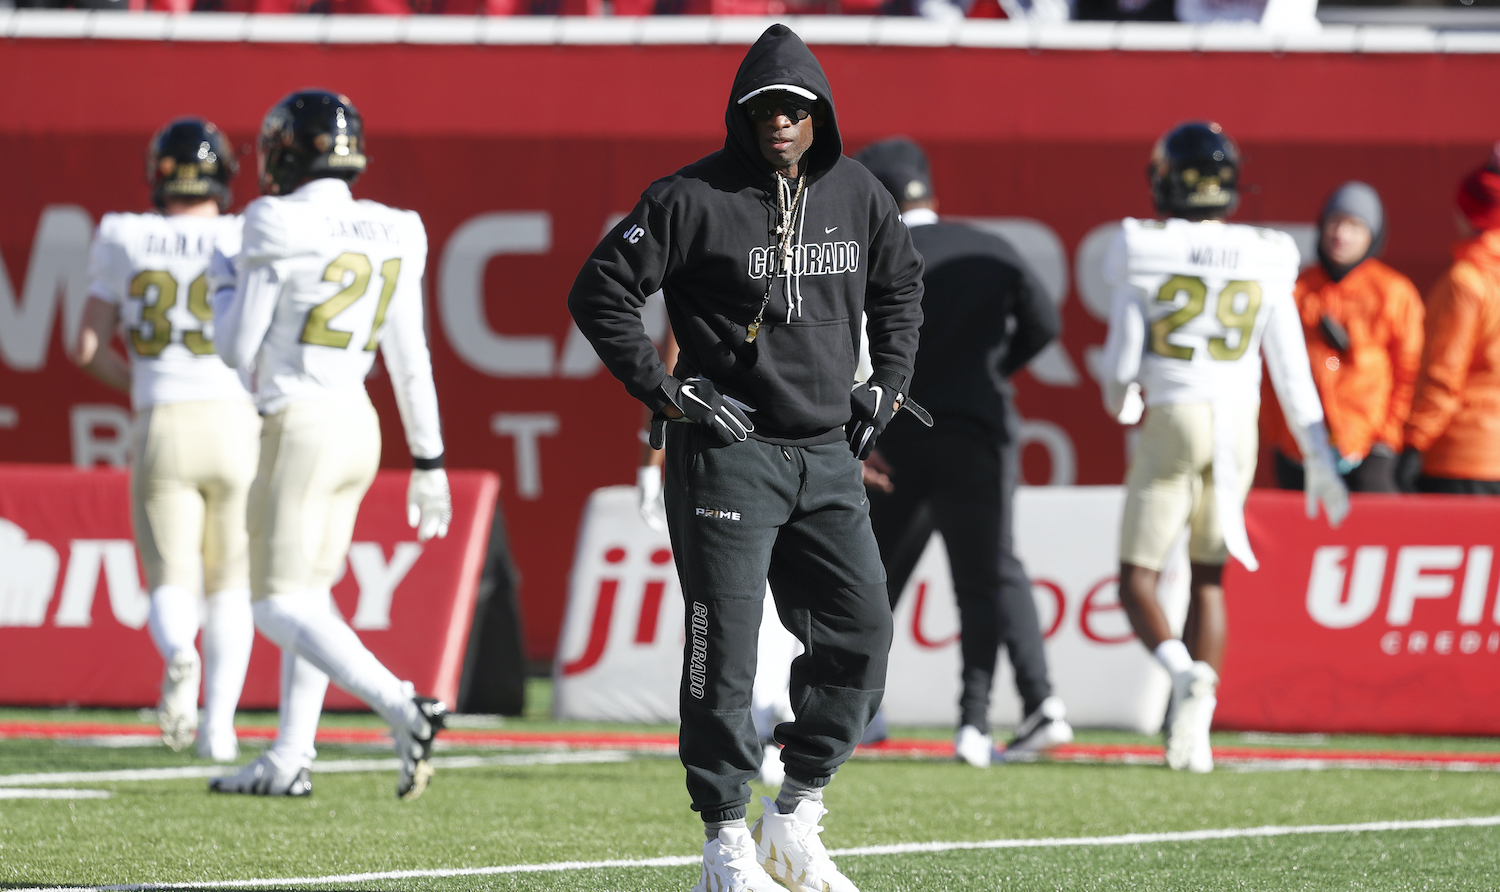 Deion Sanders head coach of the Colorado Buffaloes watches warmups before their game against the Utah Utes at Rice Eccles Stadium on November 25, 2023 in Salt Lake City, Utah. (Photo by Chris Gardner/Getty Images)